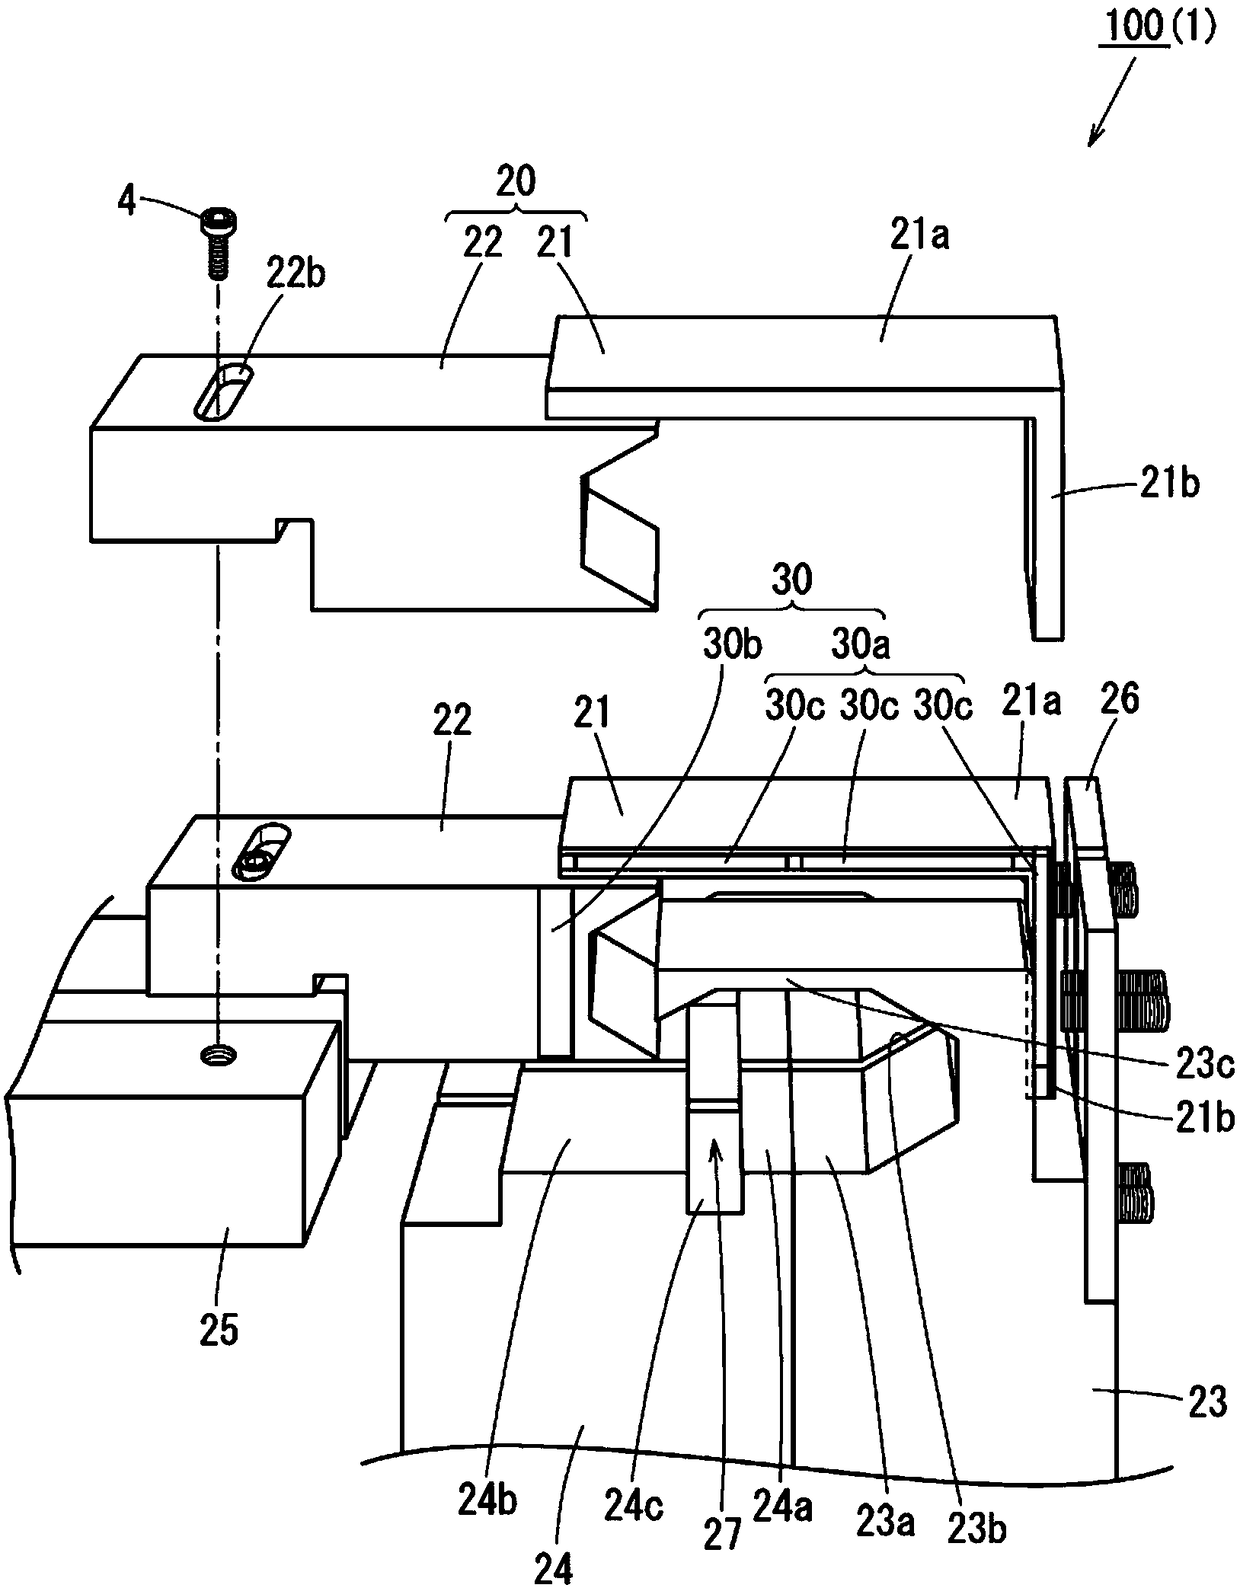 Grinding wheel guide, production line, and manufacturing method involved in manufacturing central core of secondary battery